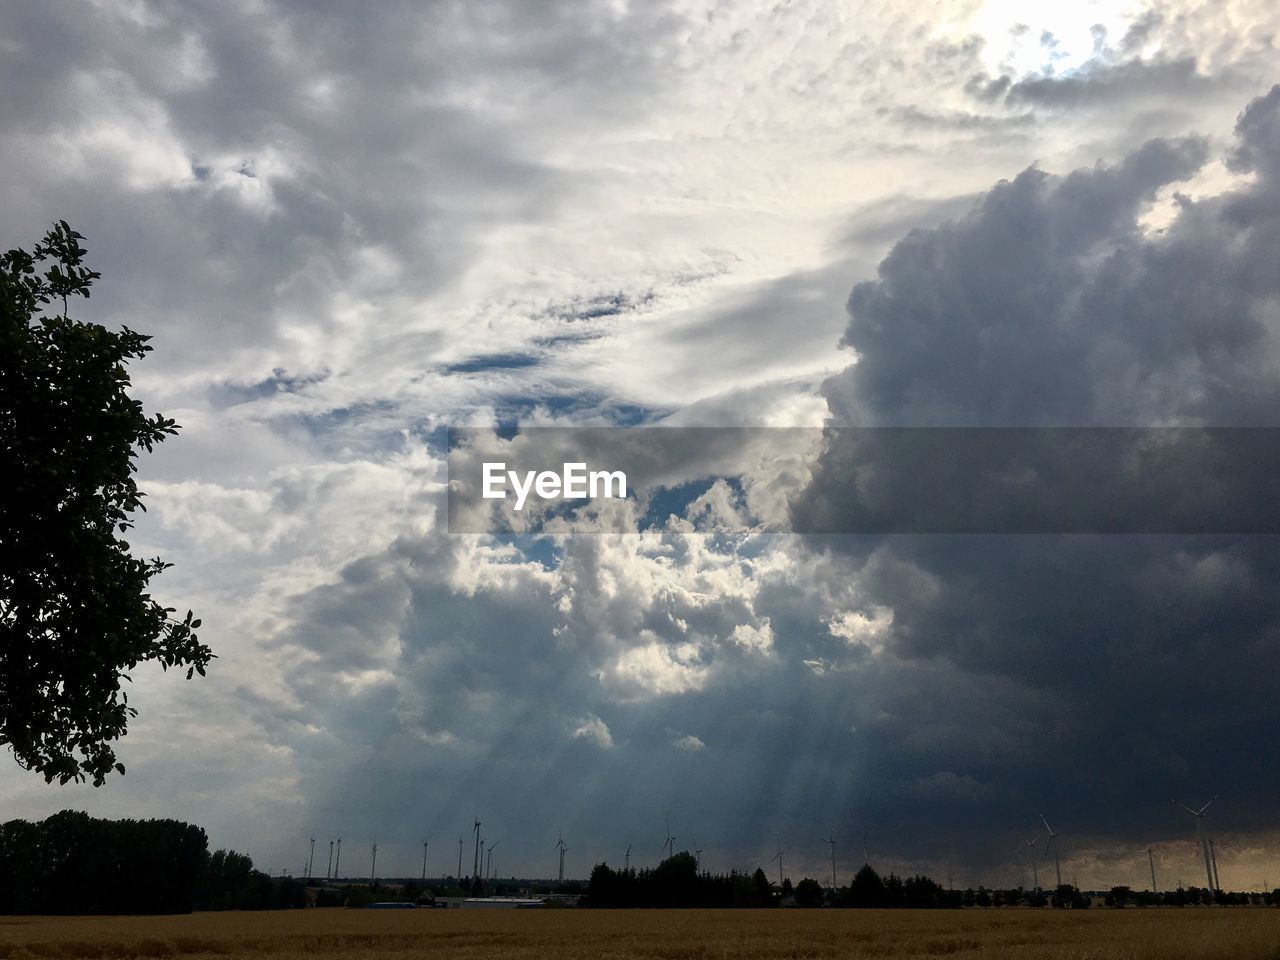 VIEW OF STORM CLOUDS OVER FIELD